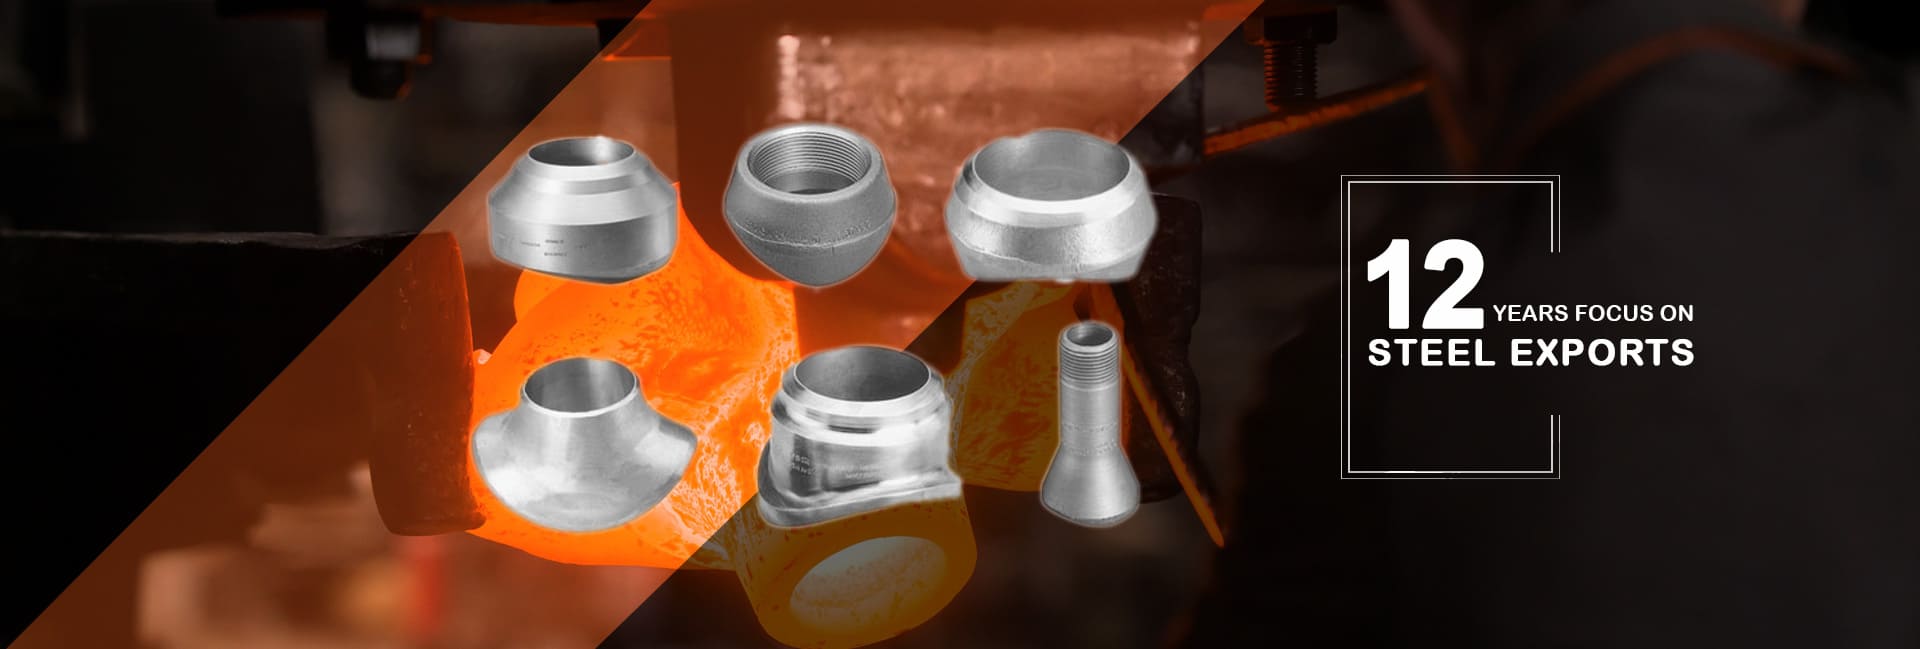 Inconel 625 Outlet Fittings